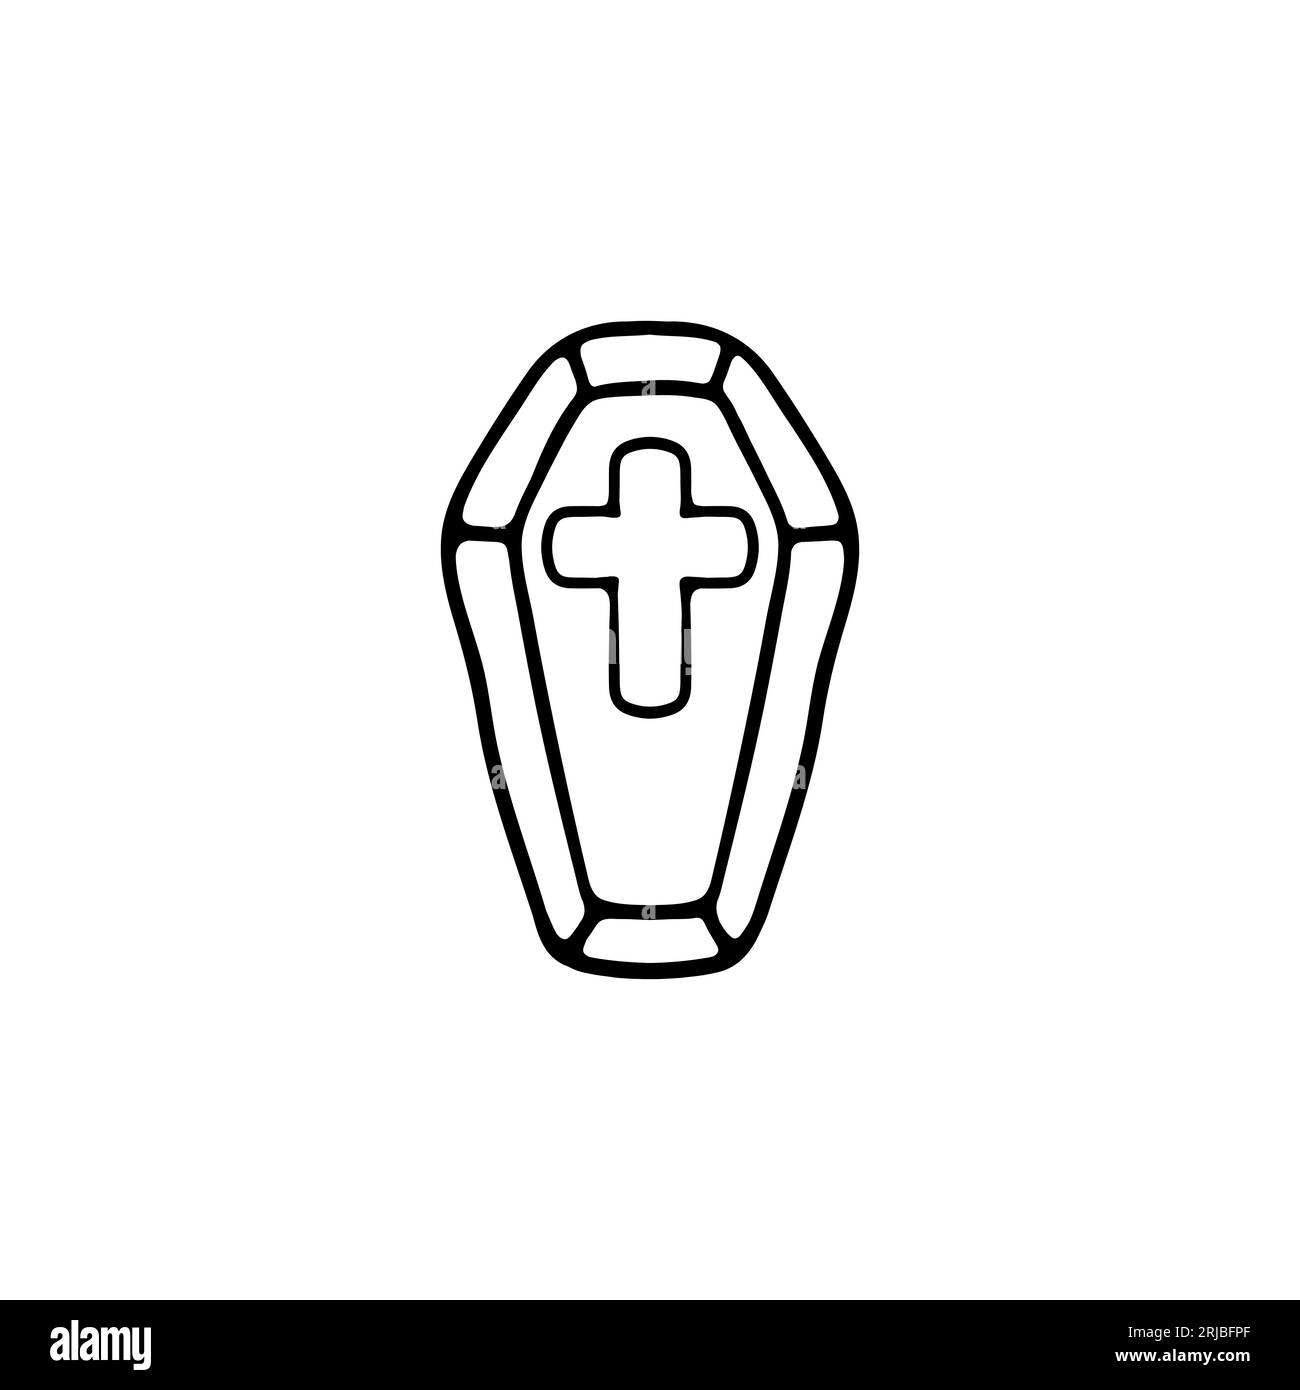 Coffin line icon. Religion, cross, funeral, cemetery, funeral ritual, epitaph. Vector black line icon on white background for Business Stock Vector